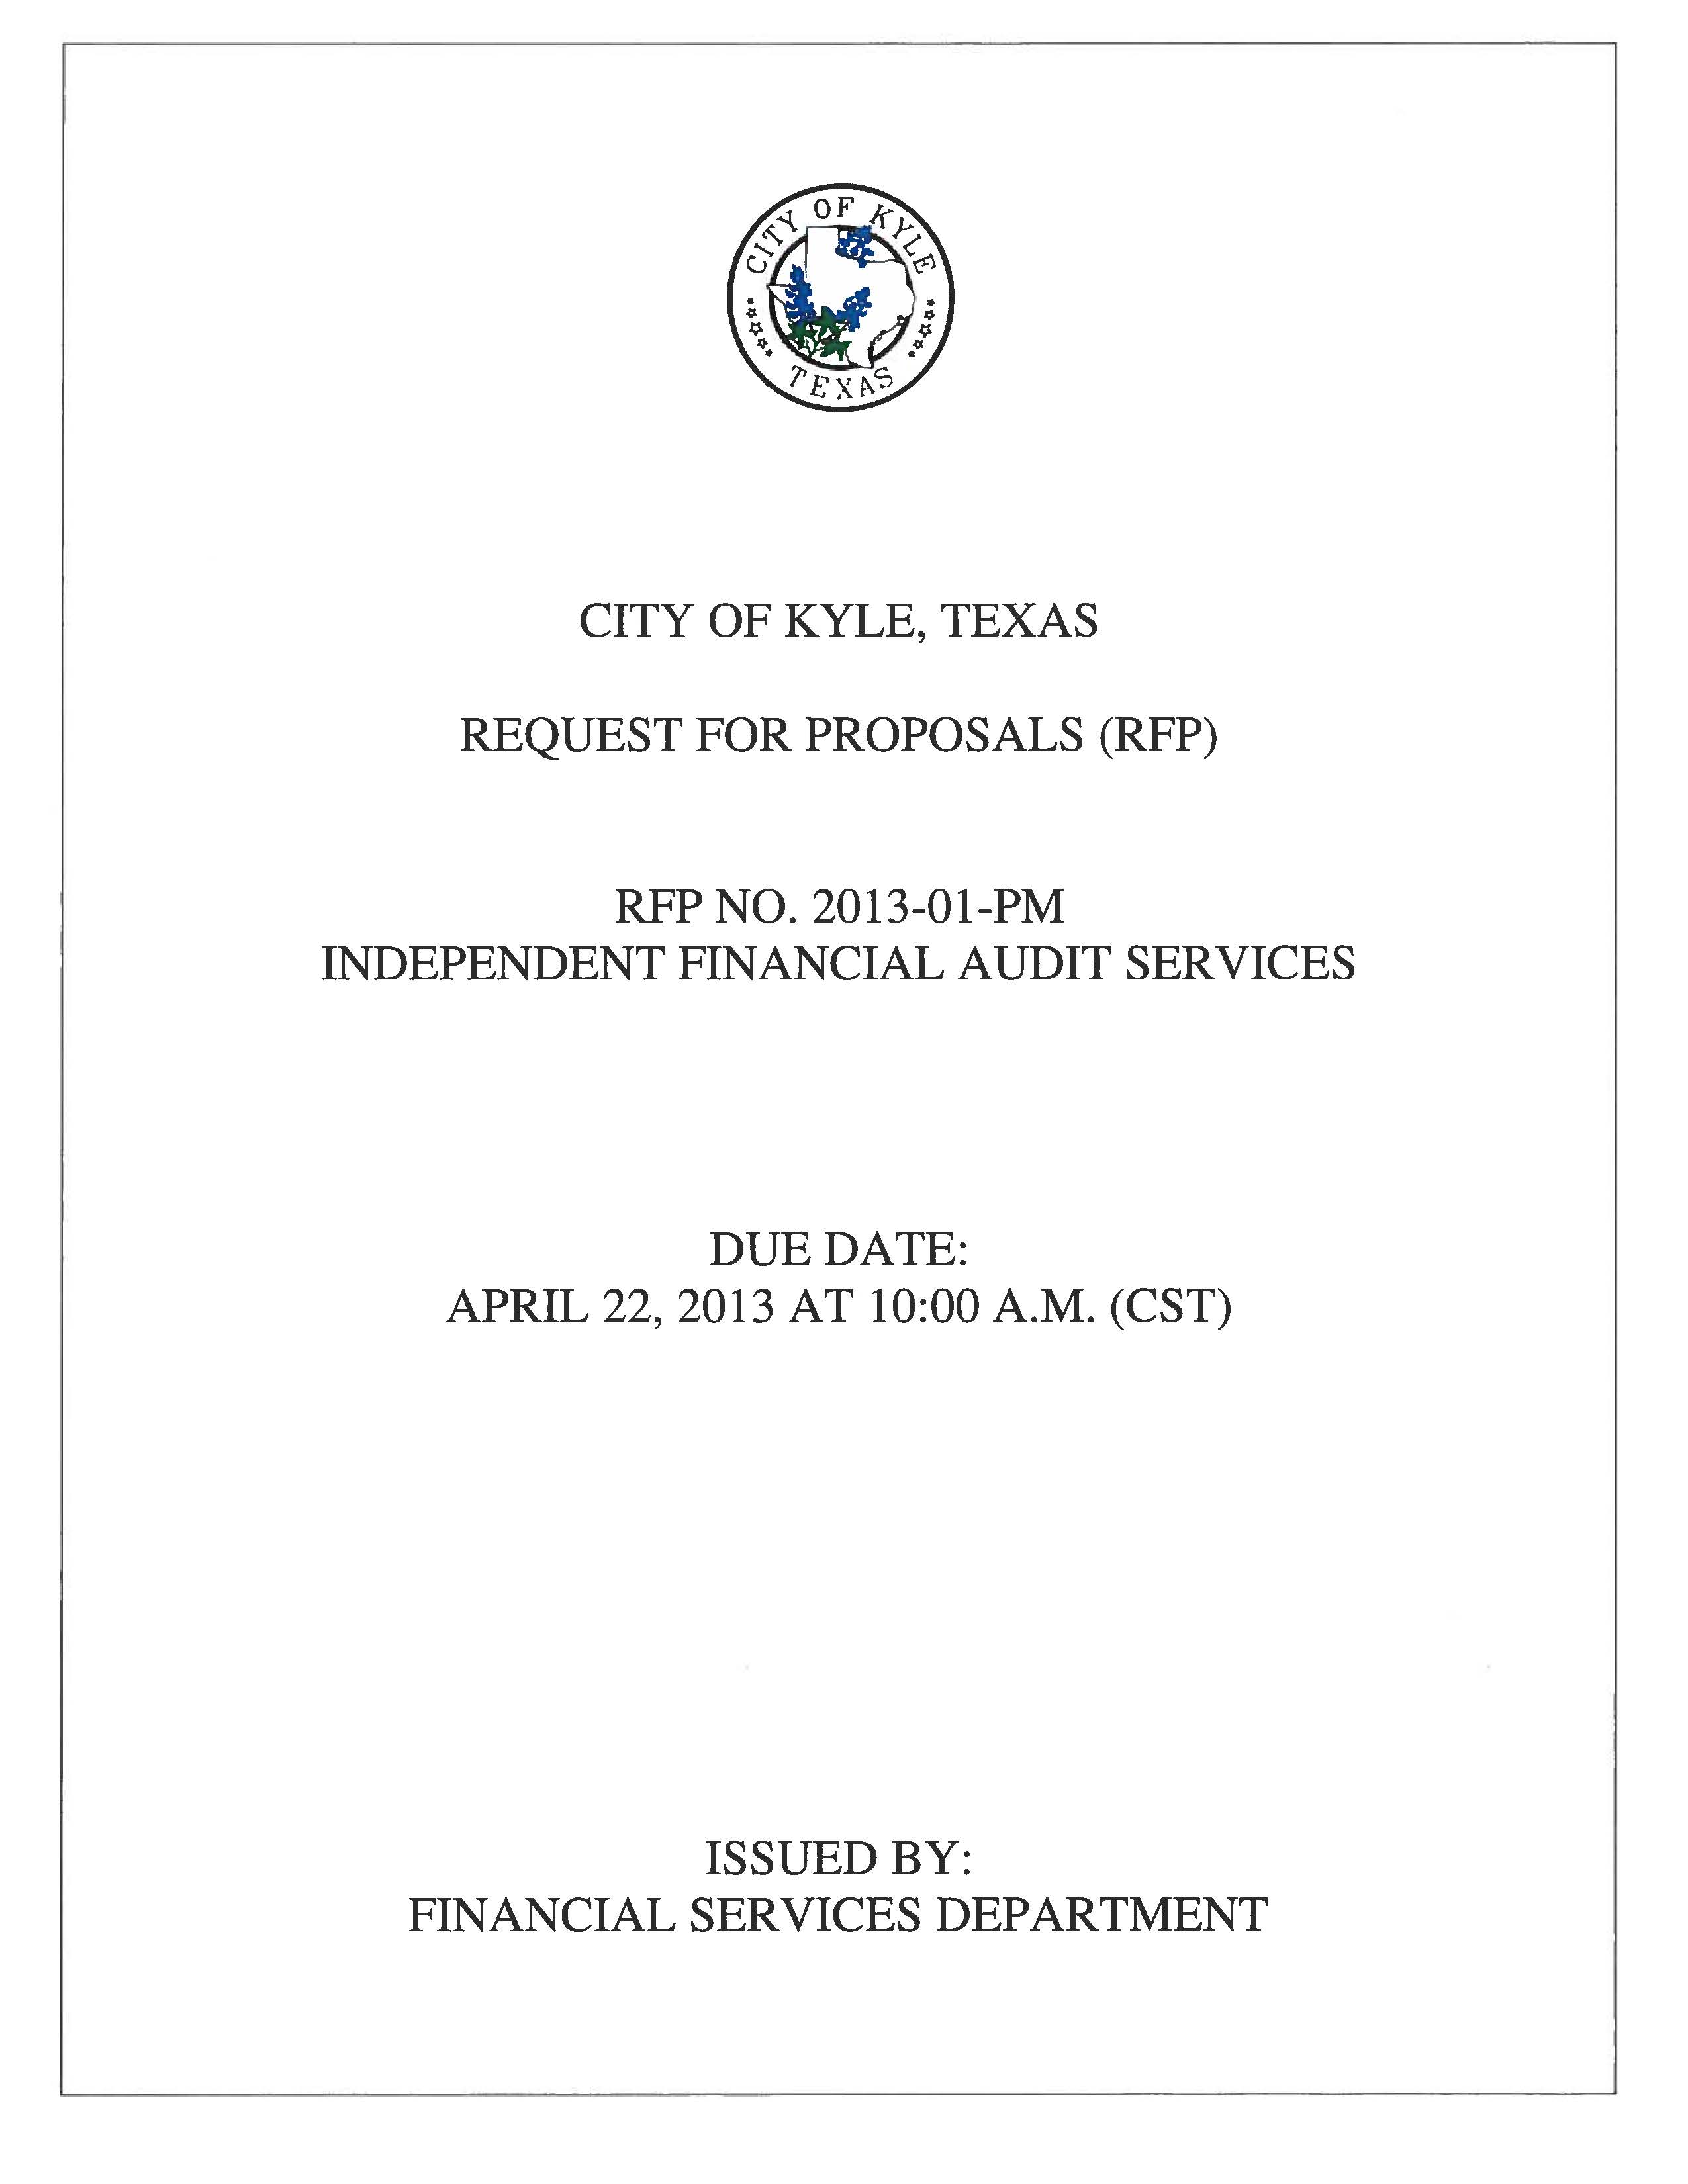 Request for Proposals (RFP) Independent Financial Audit Services